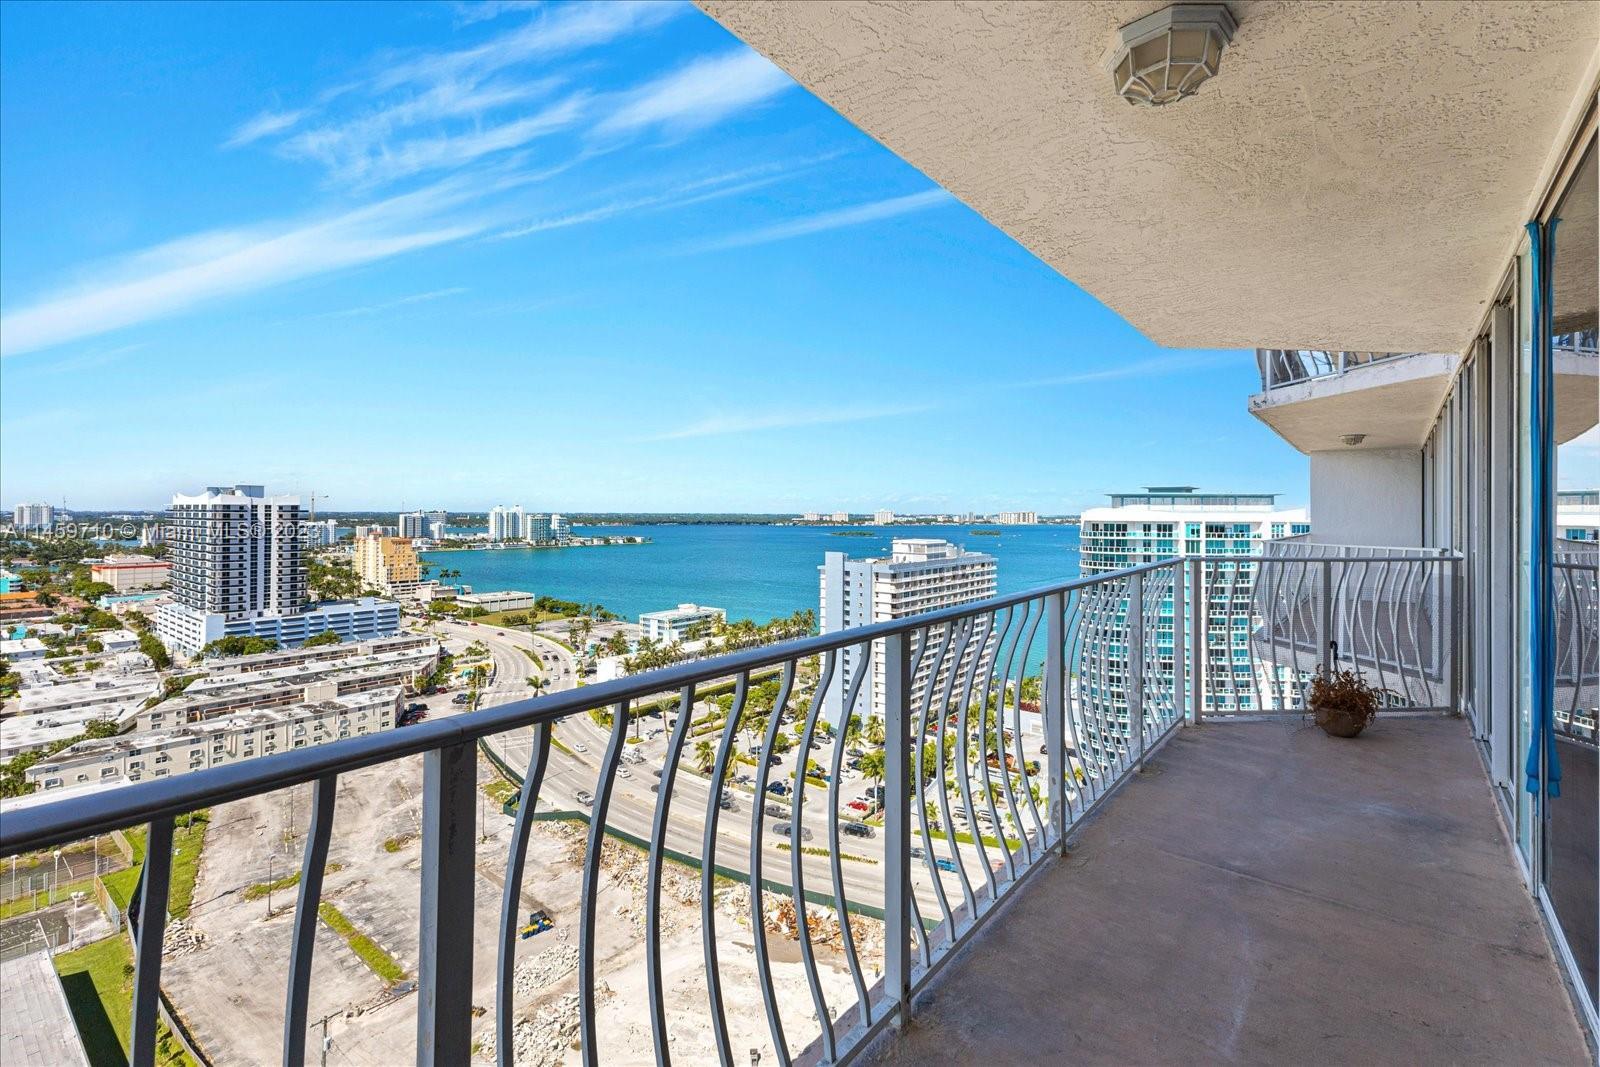 West-facing bay and Miami skyline views with unforgettable sunsets. This light-filled 1 bed, 1 bath 